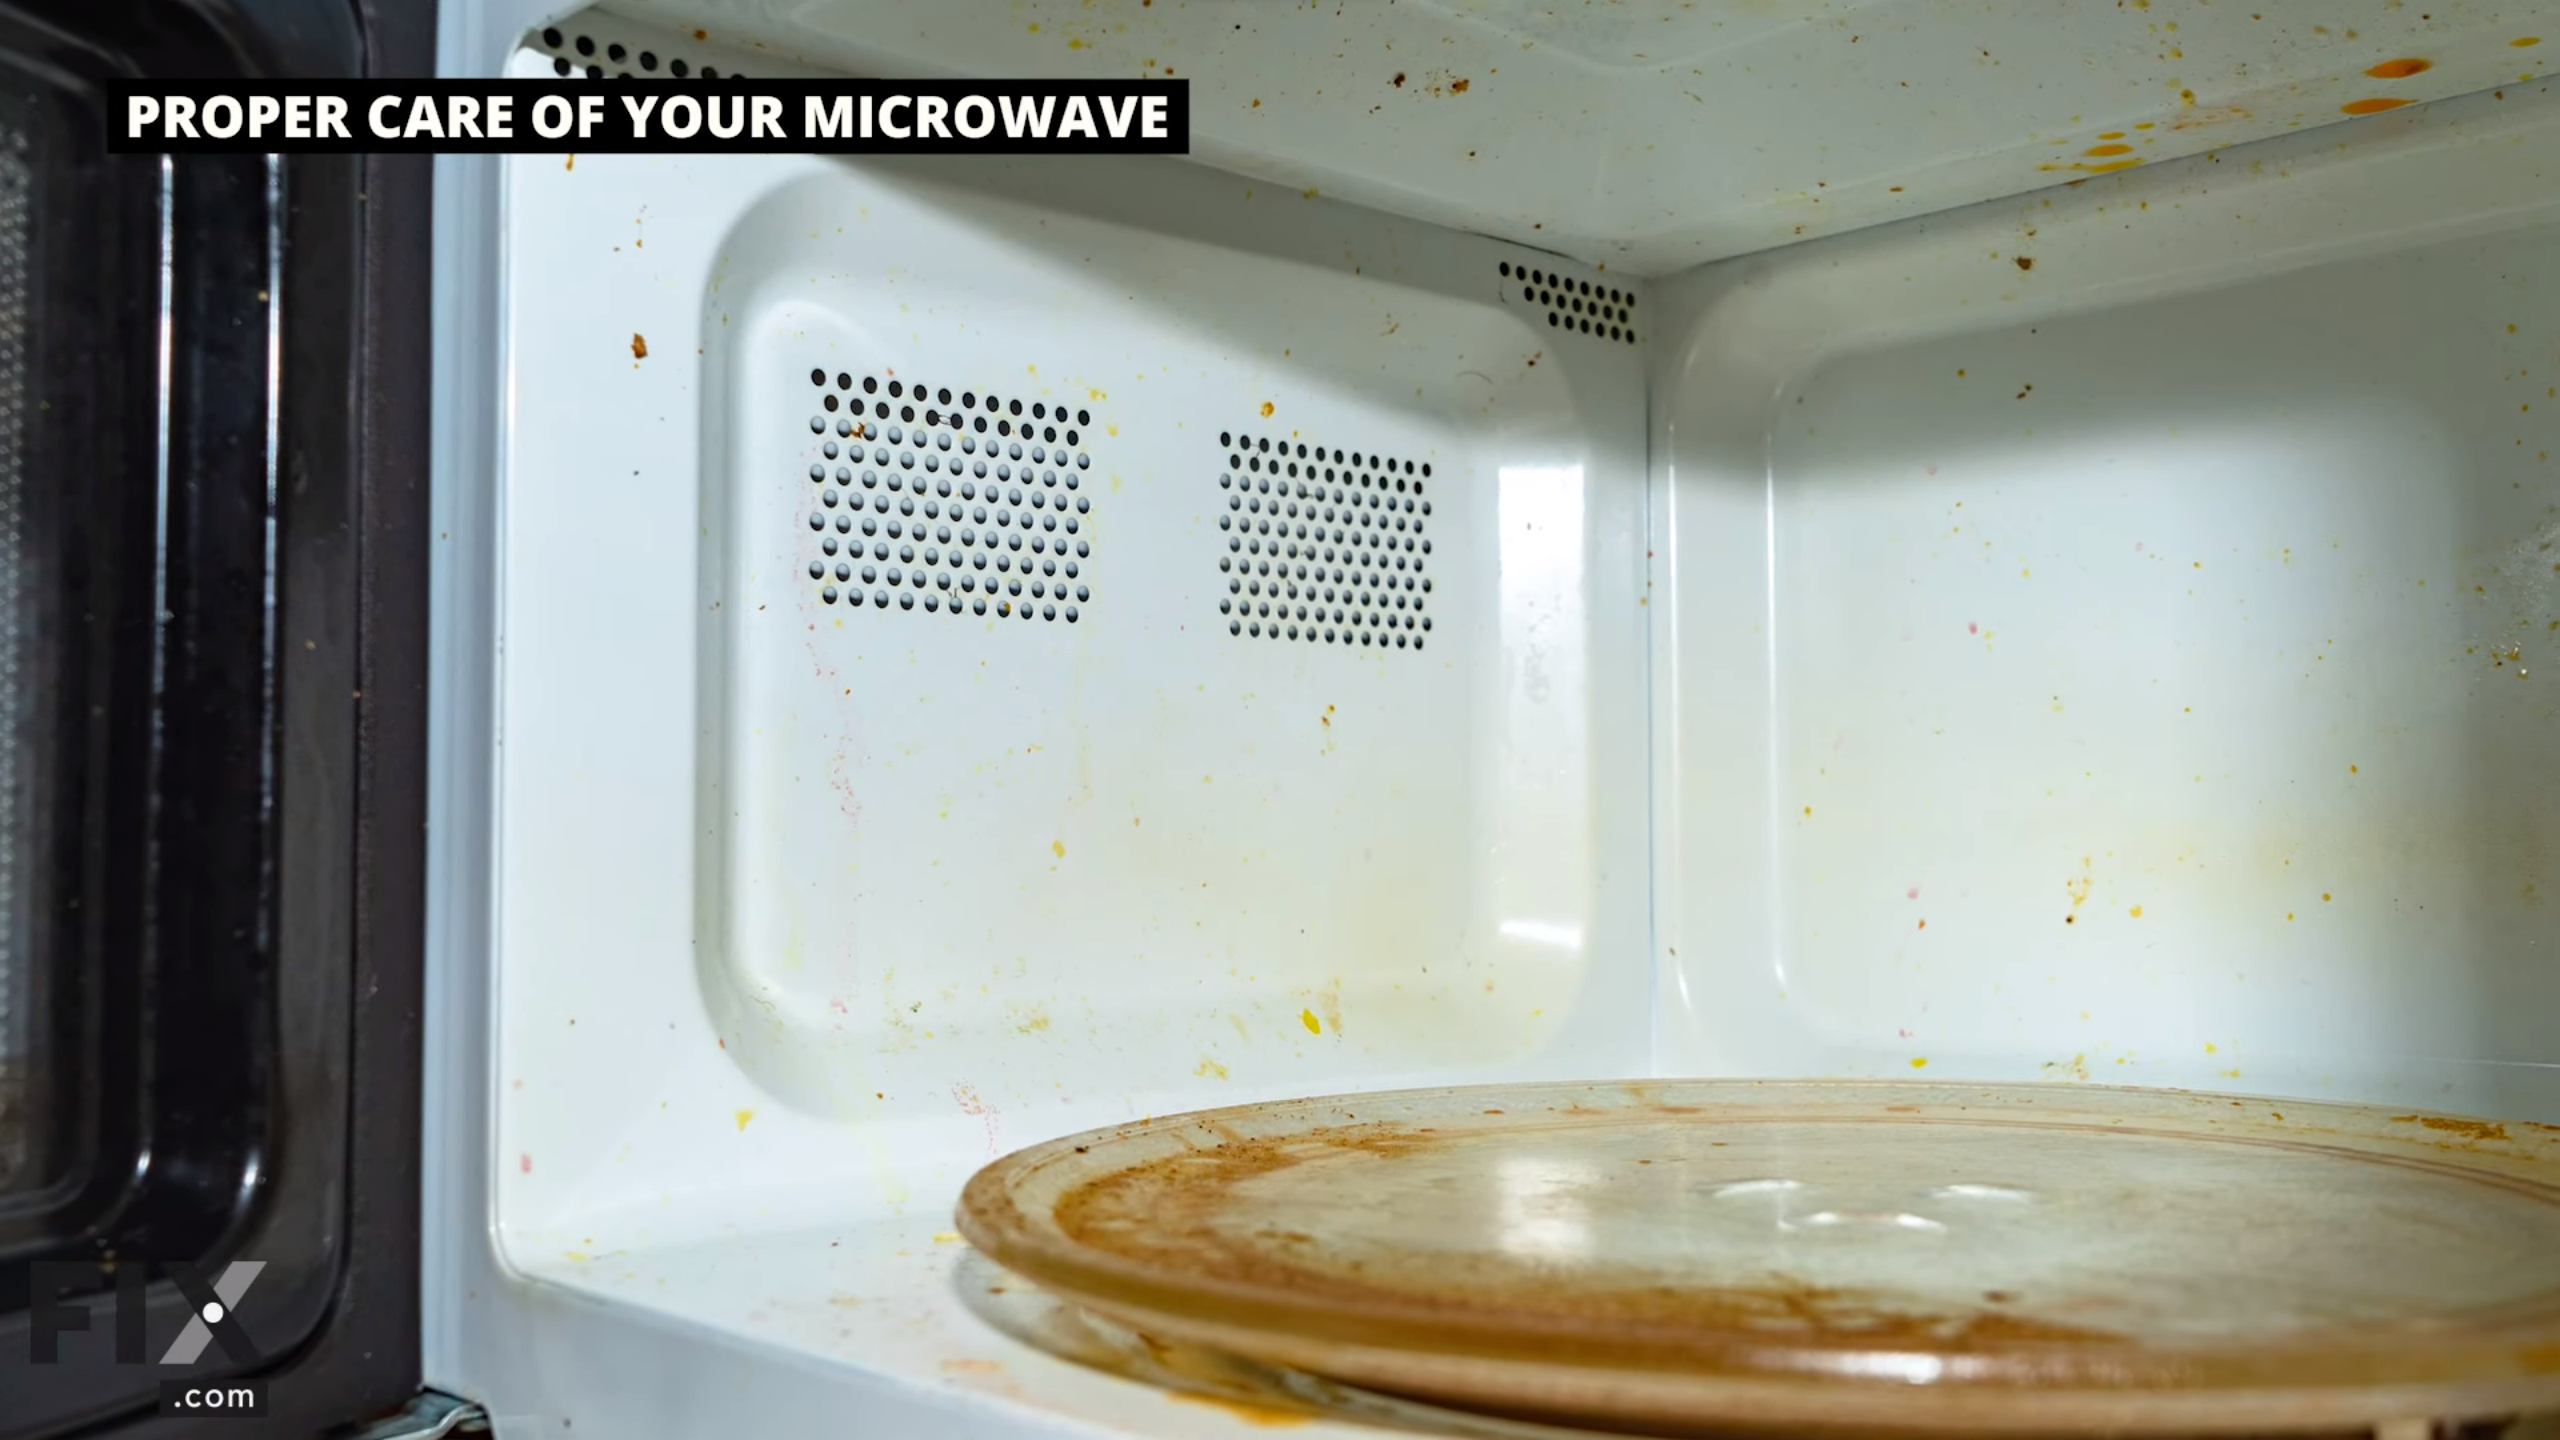 Interior of microwave with orange stained tray, and spatters on walls.